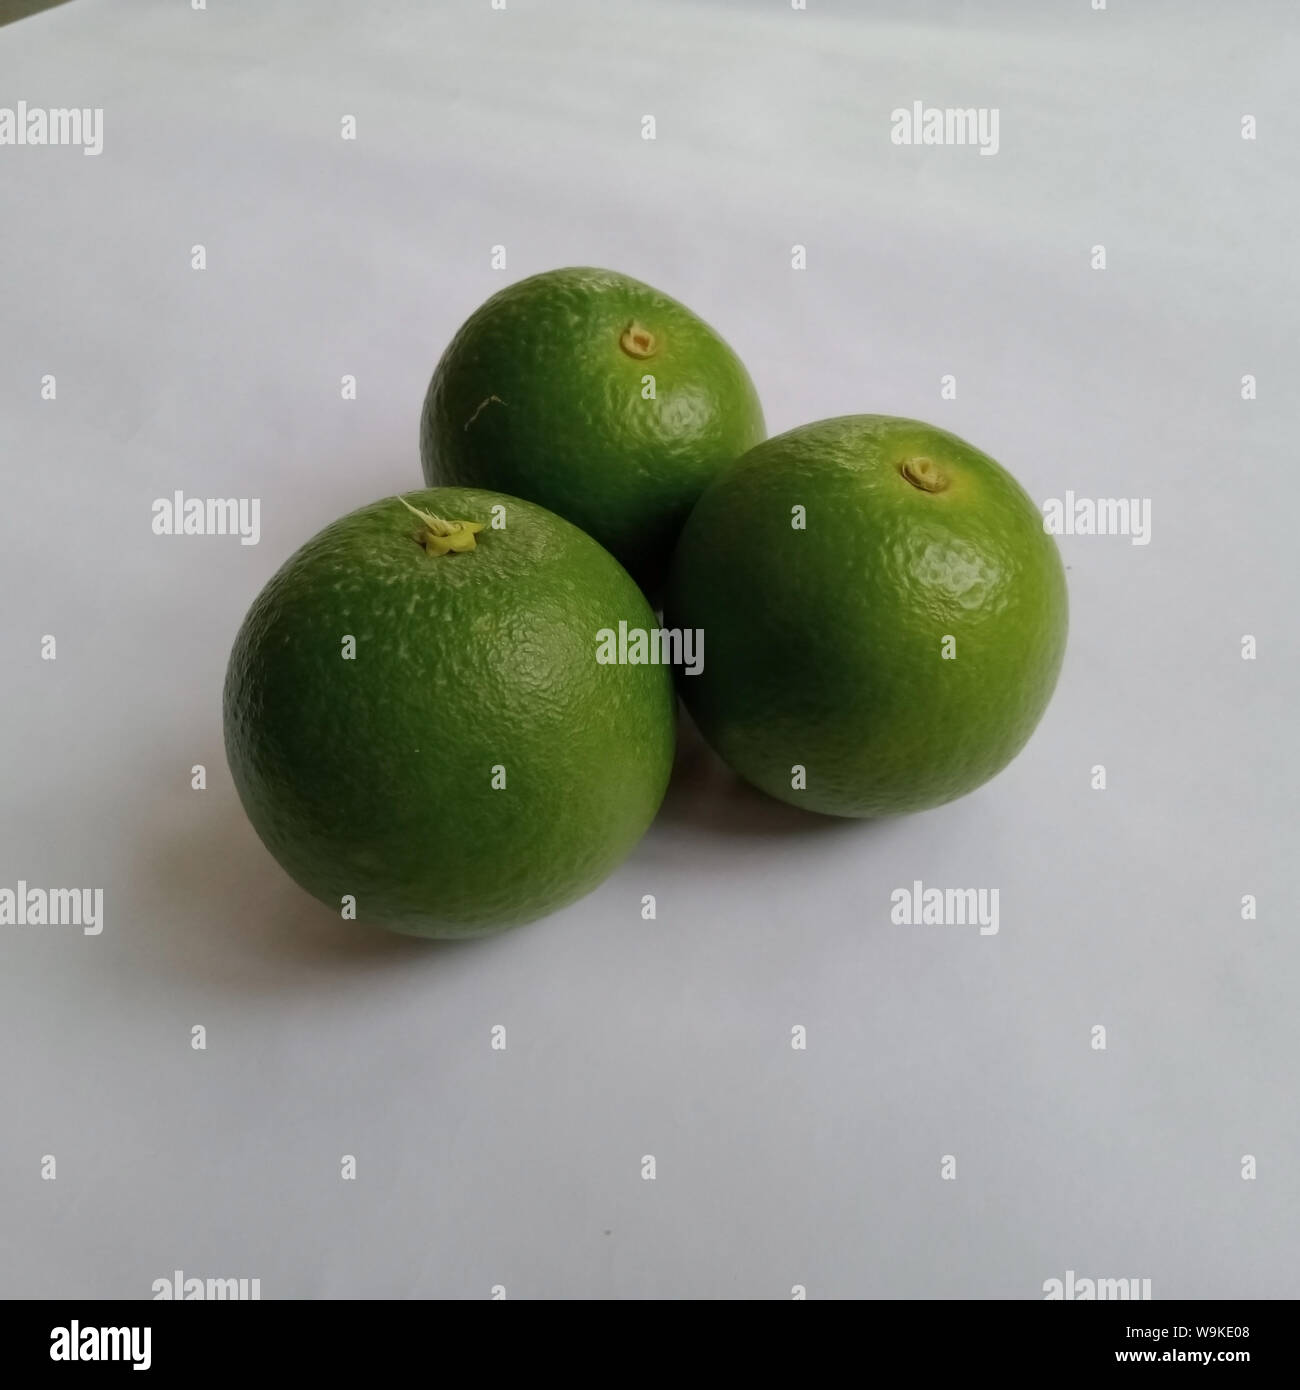 Three sweet lime (sweet limetta) fruits on a white background Stock Photo